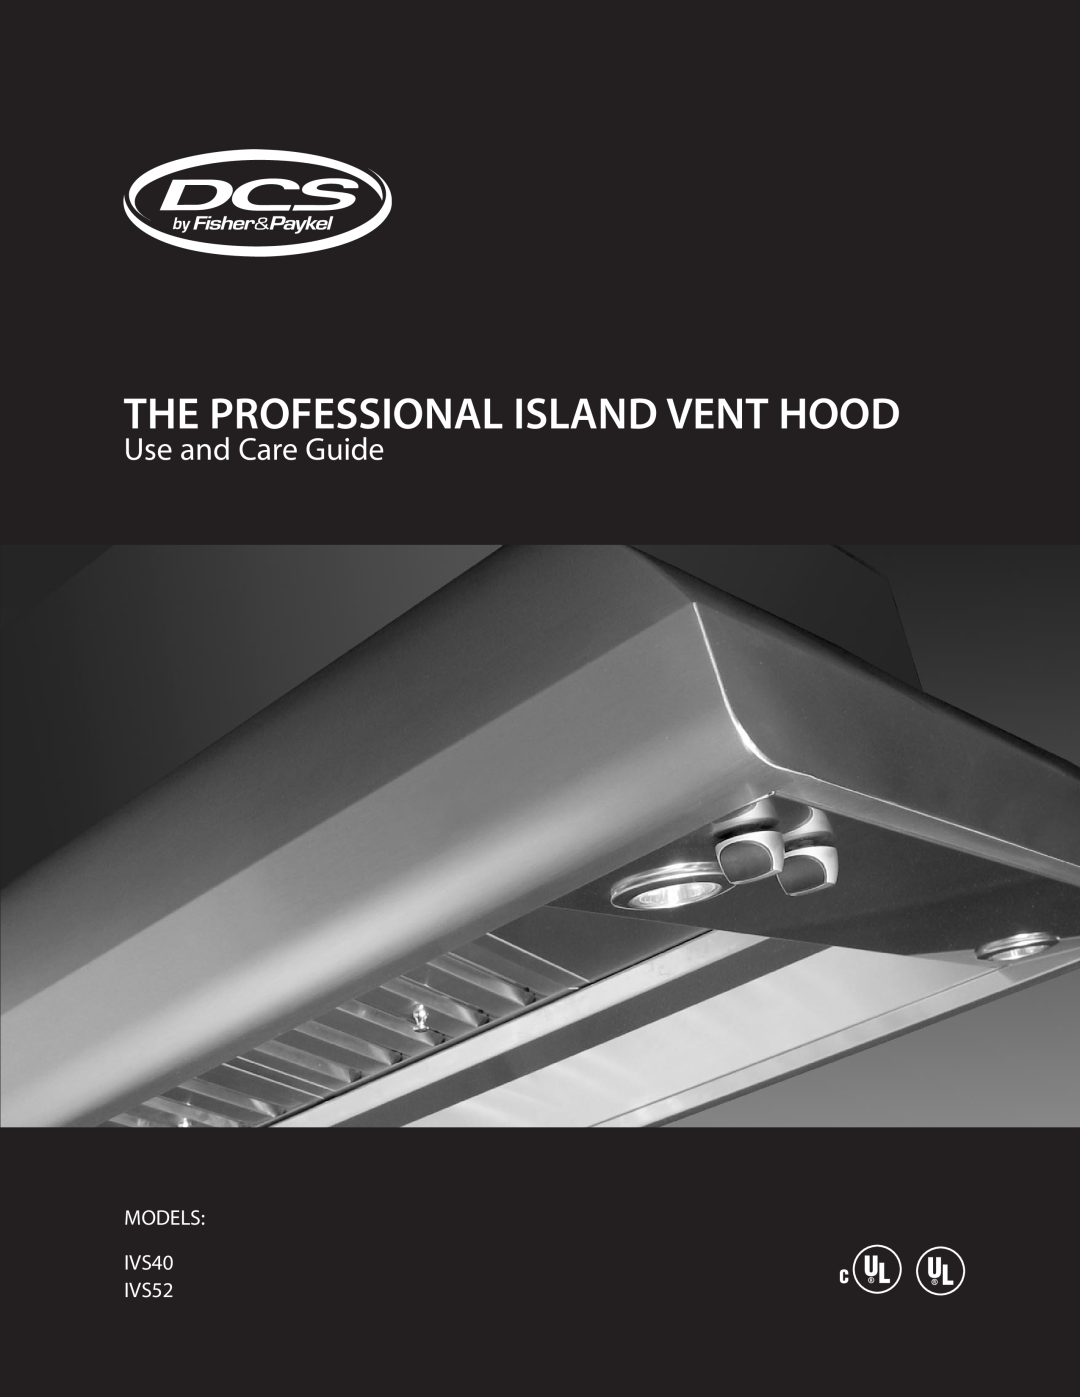 DCS manual Use and Care Guide, MODELS IVS40 IVS52, The Professional Island Vent Hood 